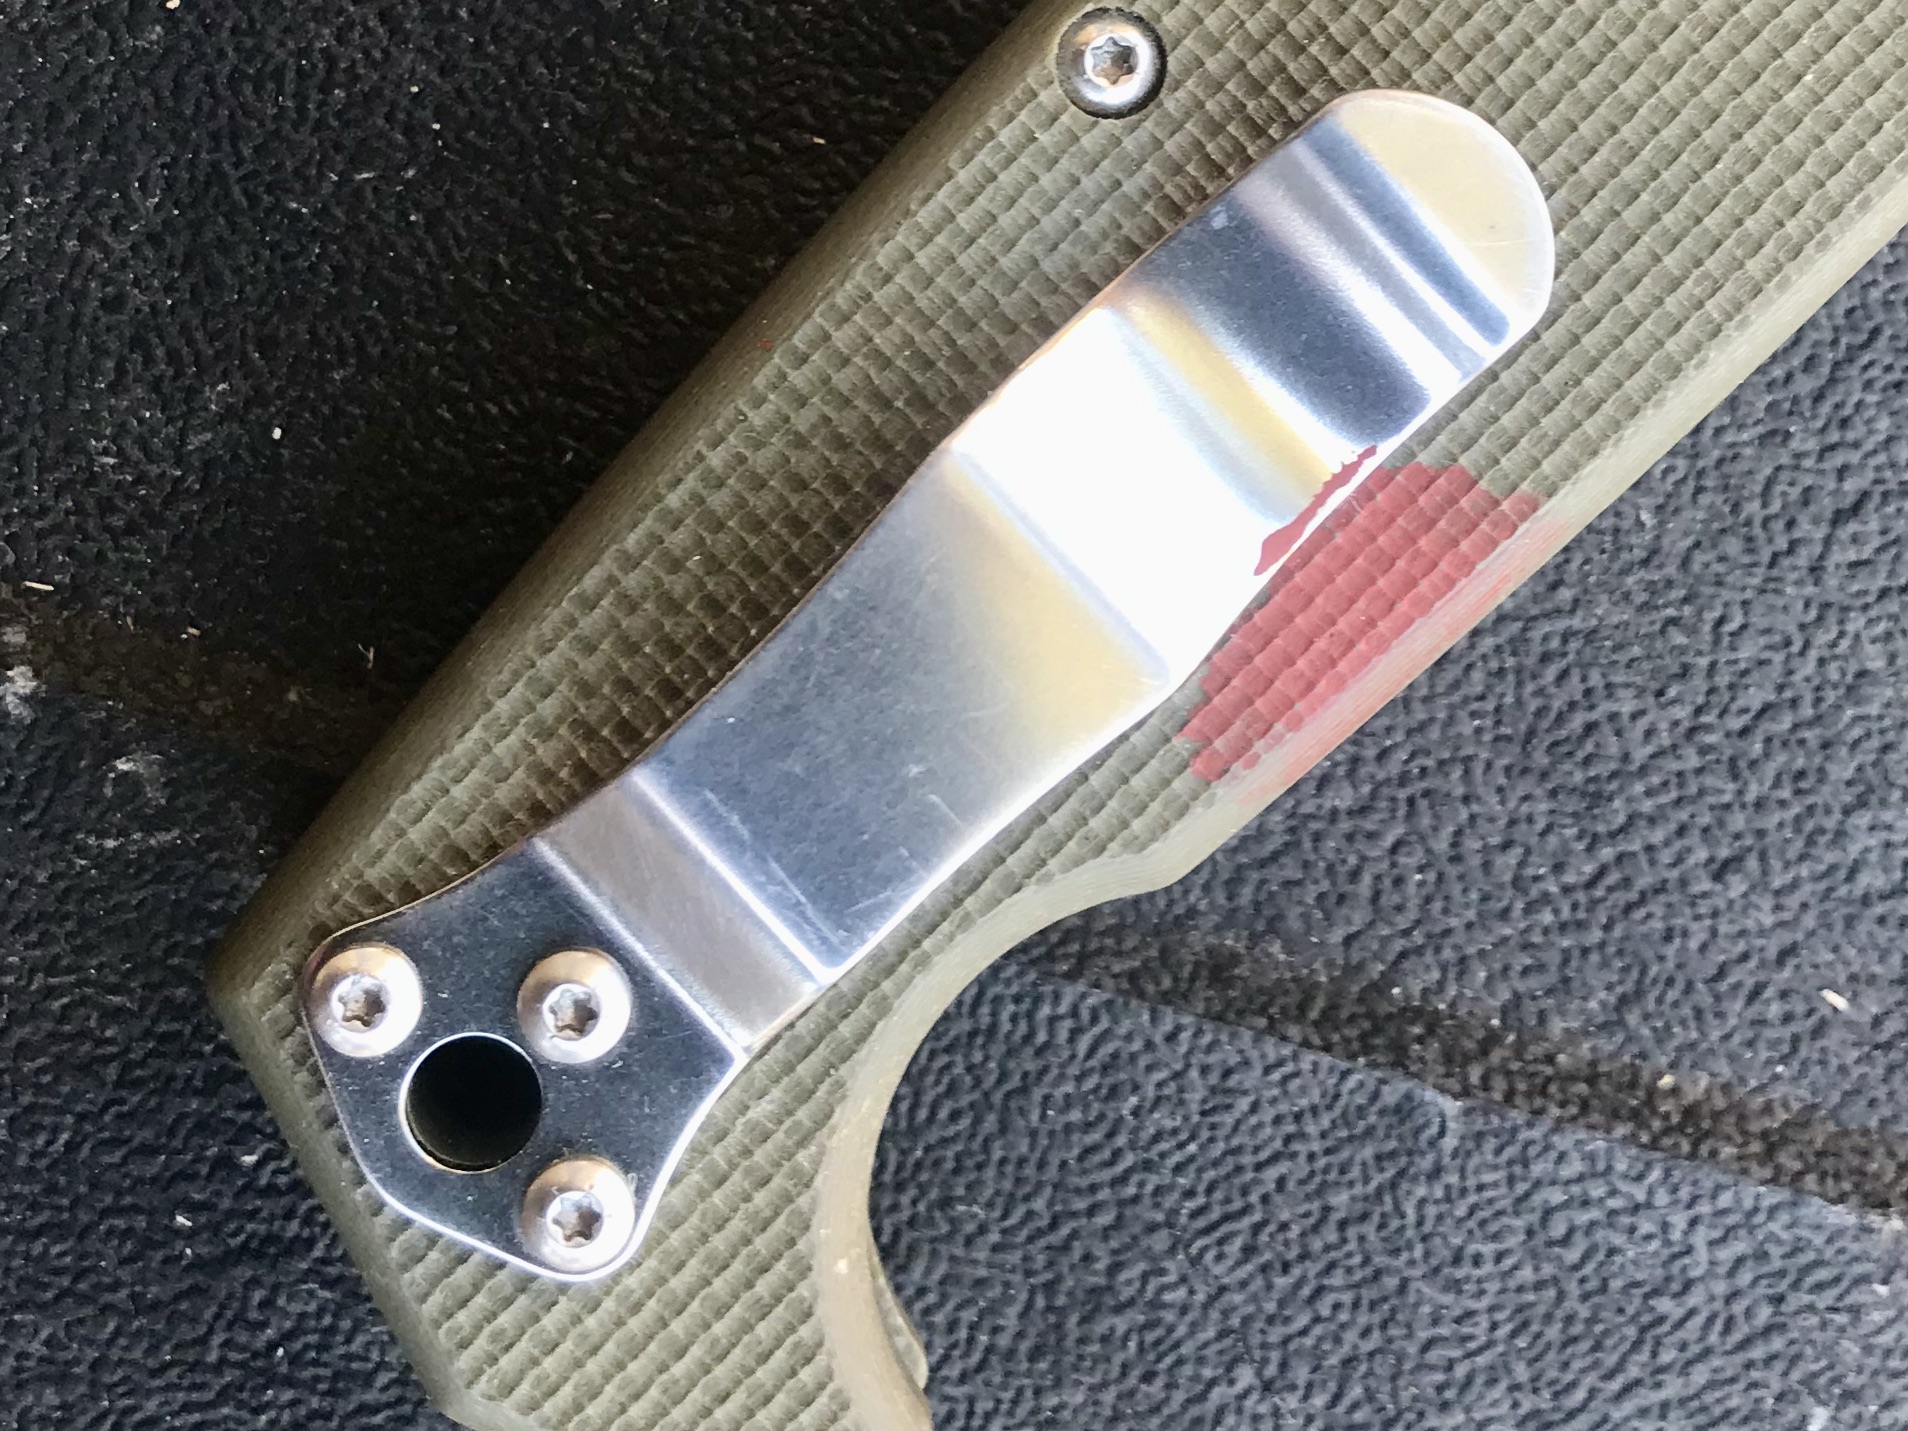 I spilled some paint on the grip. I may have been opening the can with the edge of a scale. But the clip--that's the point here--is wide and robust enough for the knife's weight.